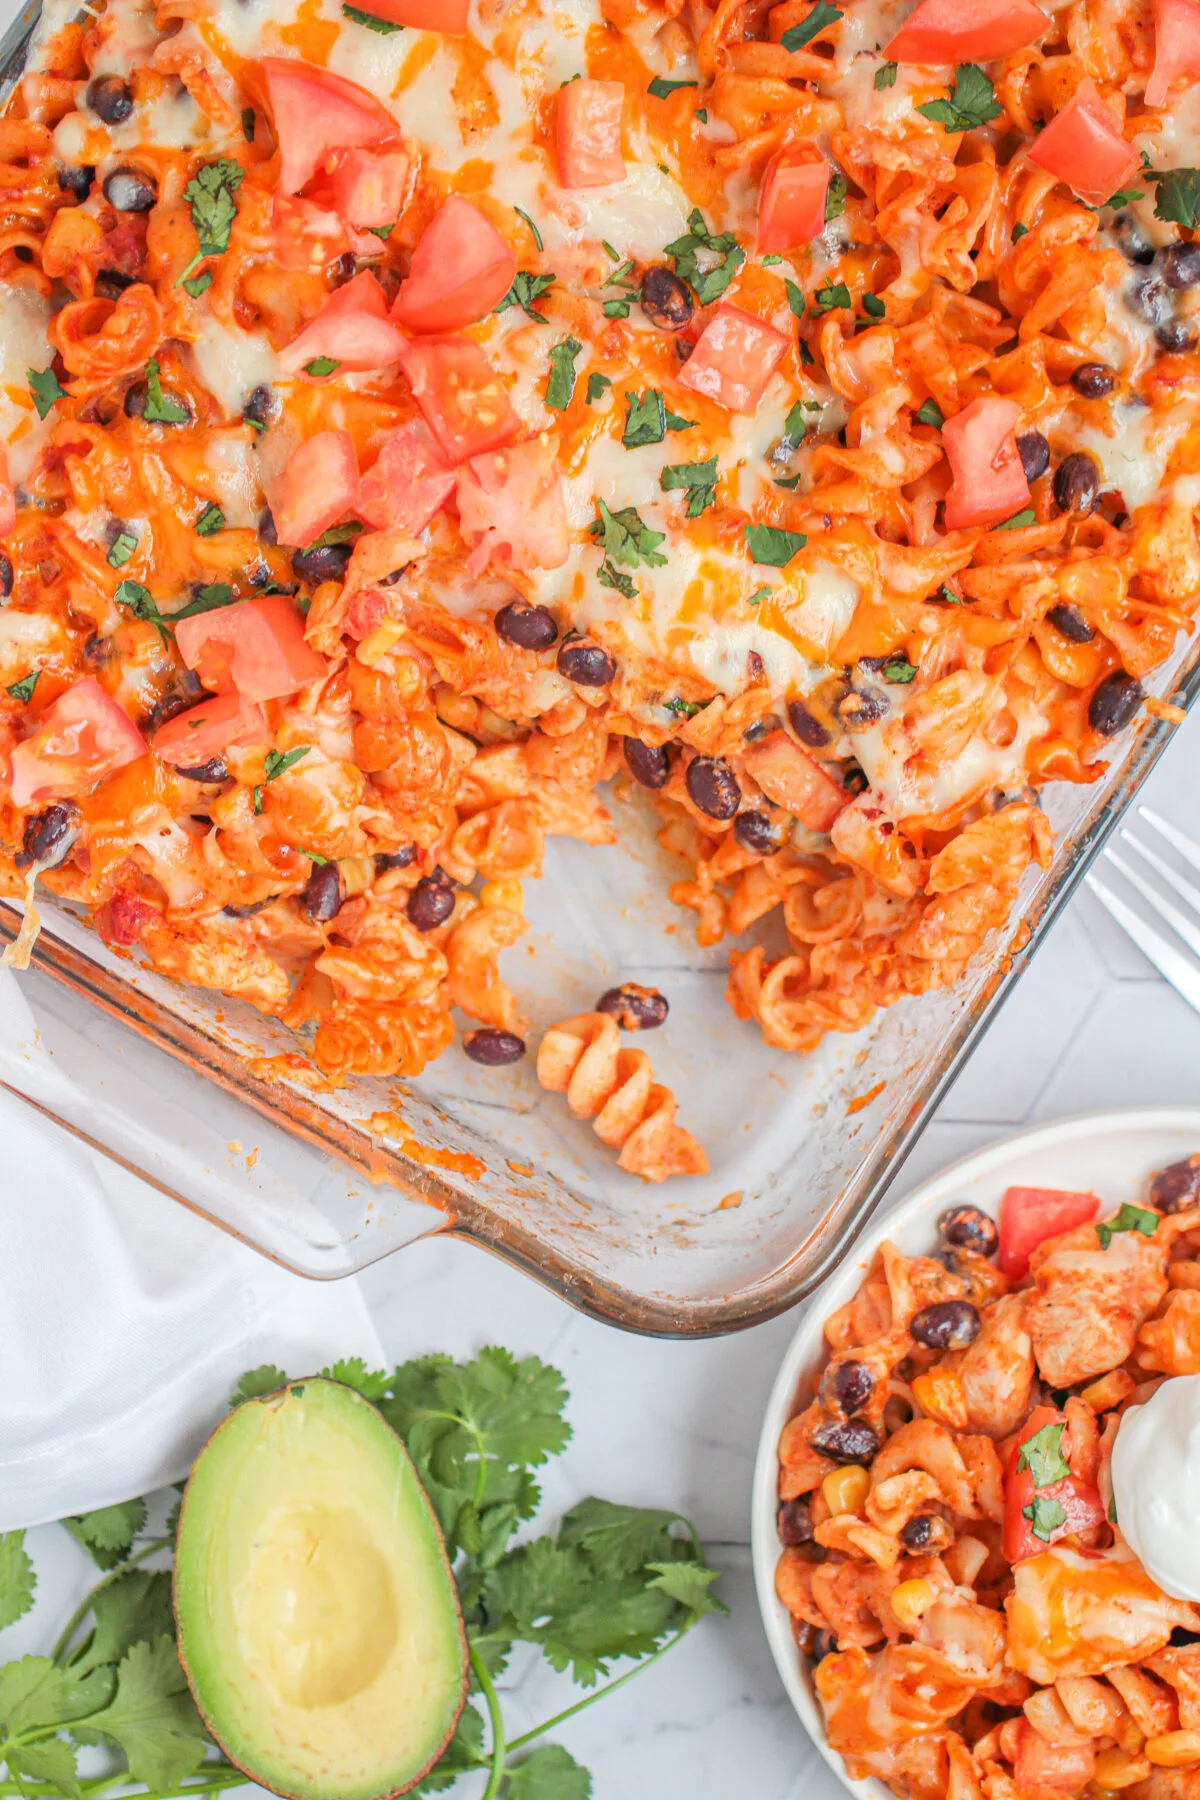 Fiesta Chicken Casserole is a fun twist on the traditional chicken and noodle casserole. It's easy to make, and full of Tex-Mex flavours!